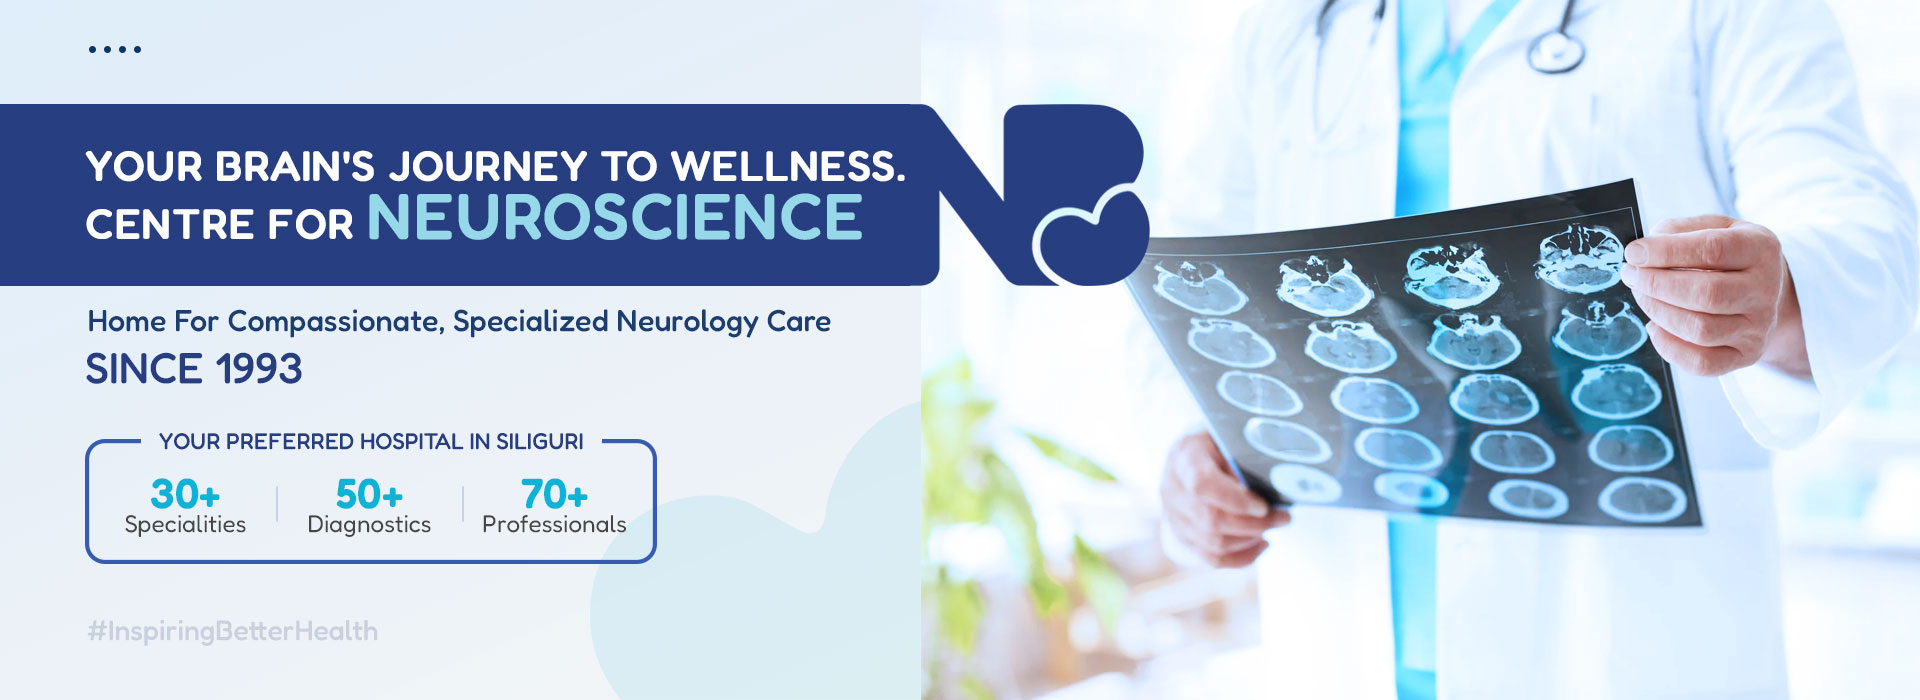 Home For Compassionate, Specialized Neurology Care